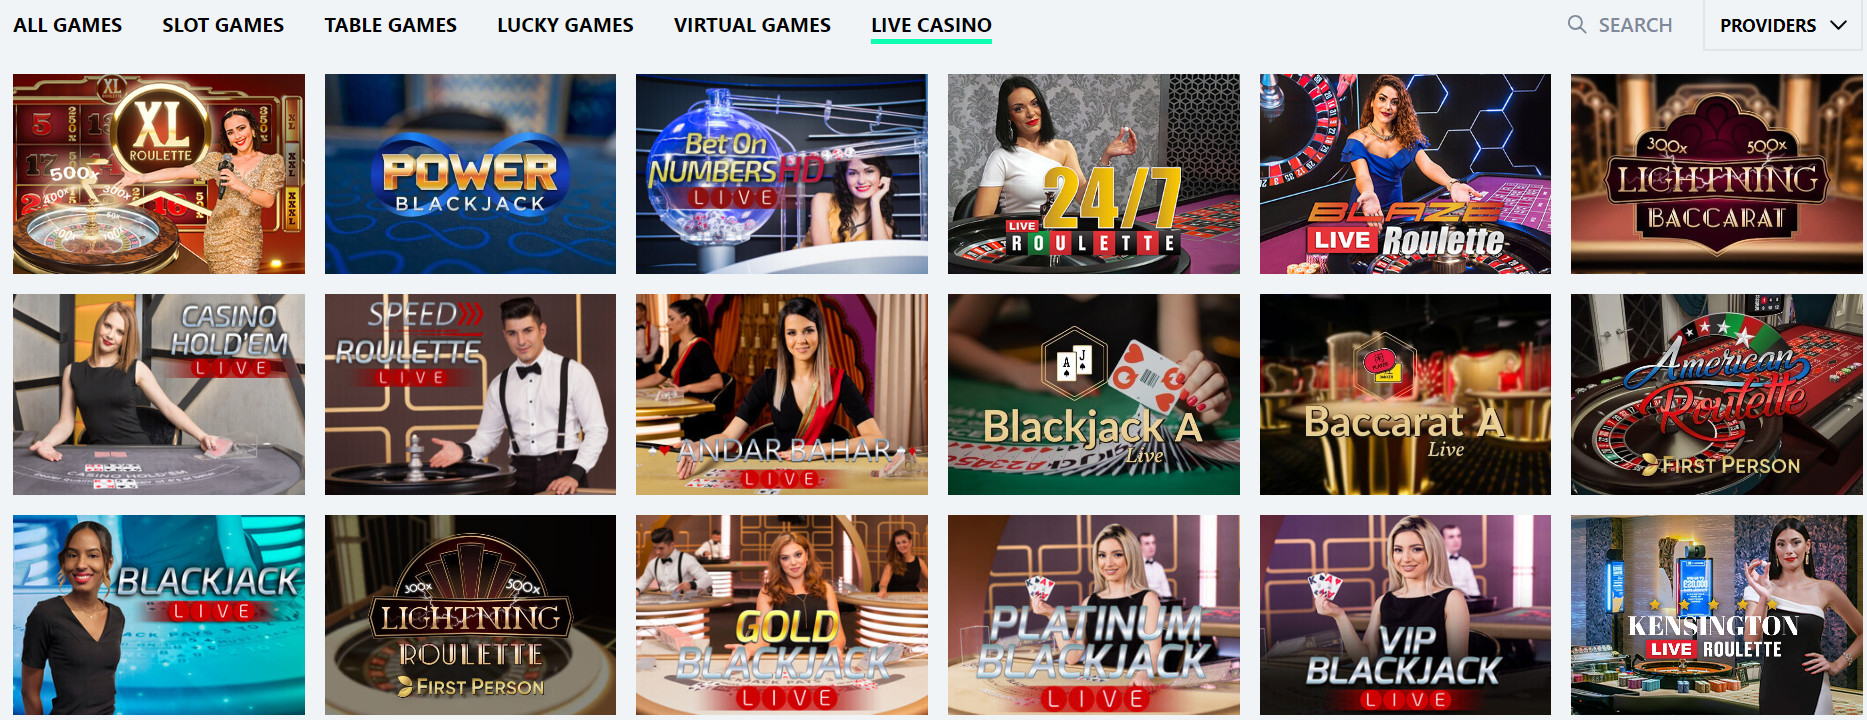 Live Casino Section at Wallacebet Casino